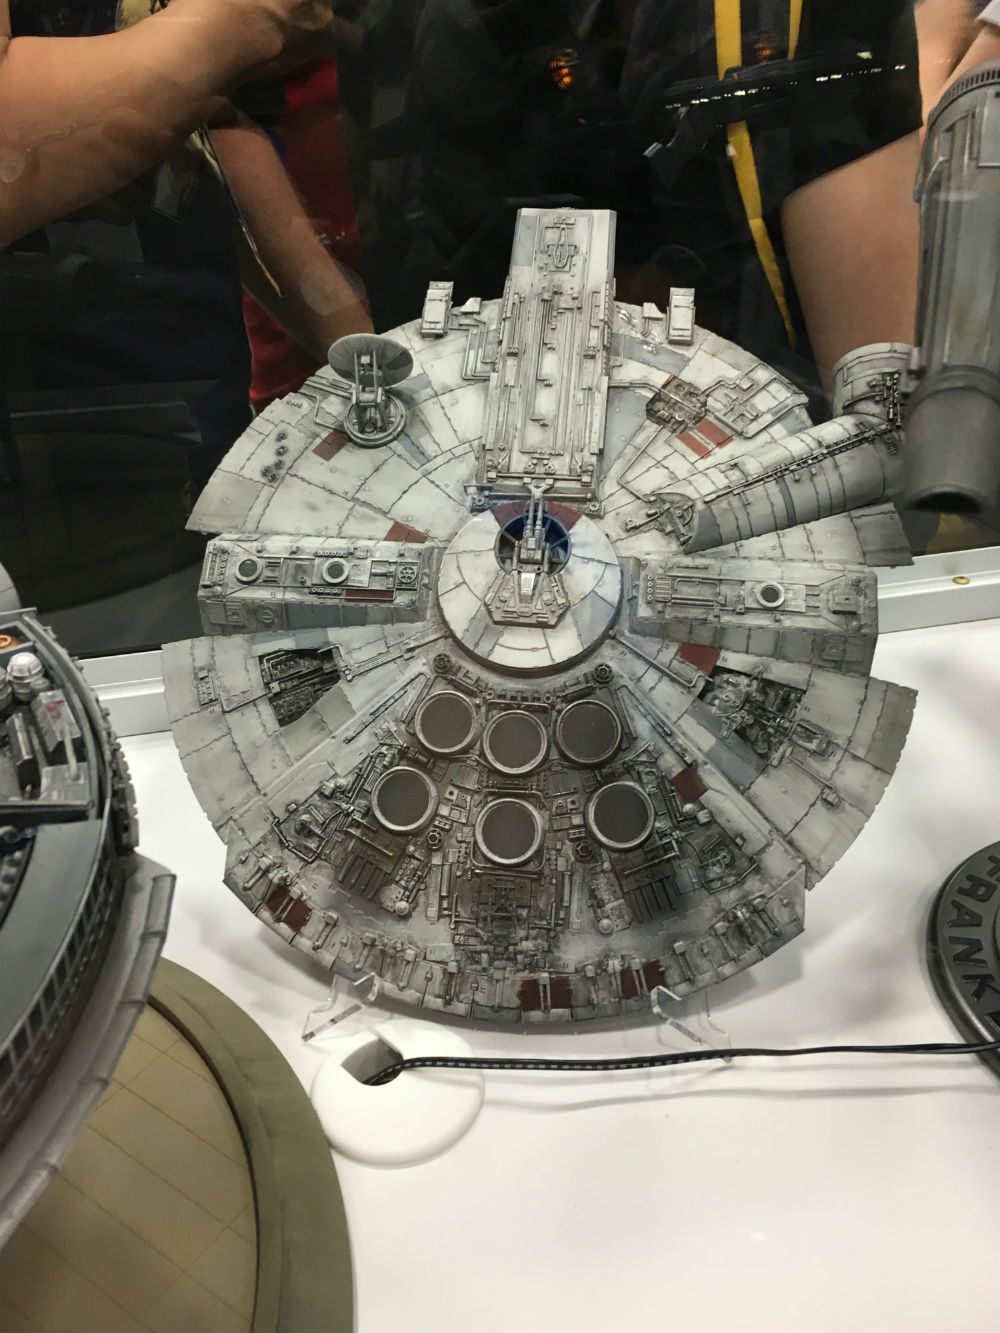 So That’s How The Inside Of The Millennium Falcon Is Laid Out